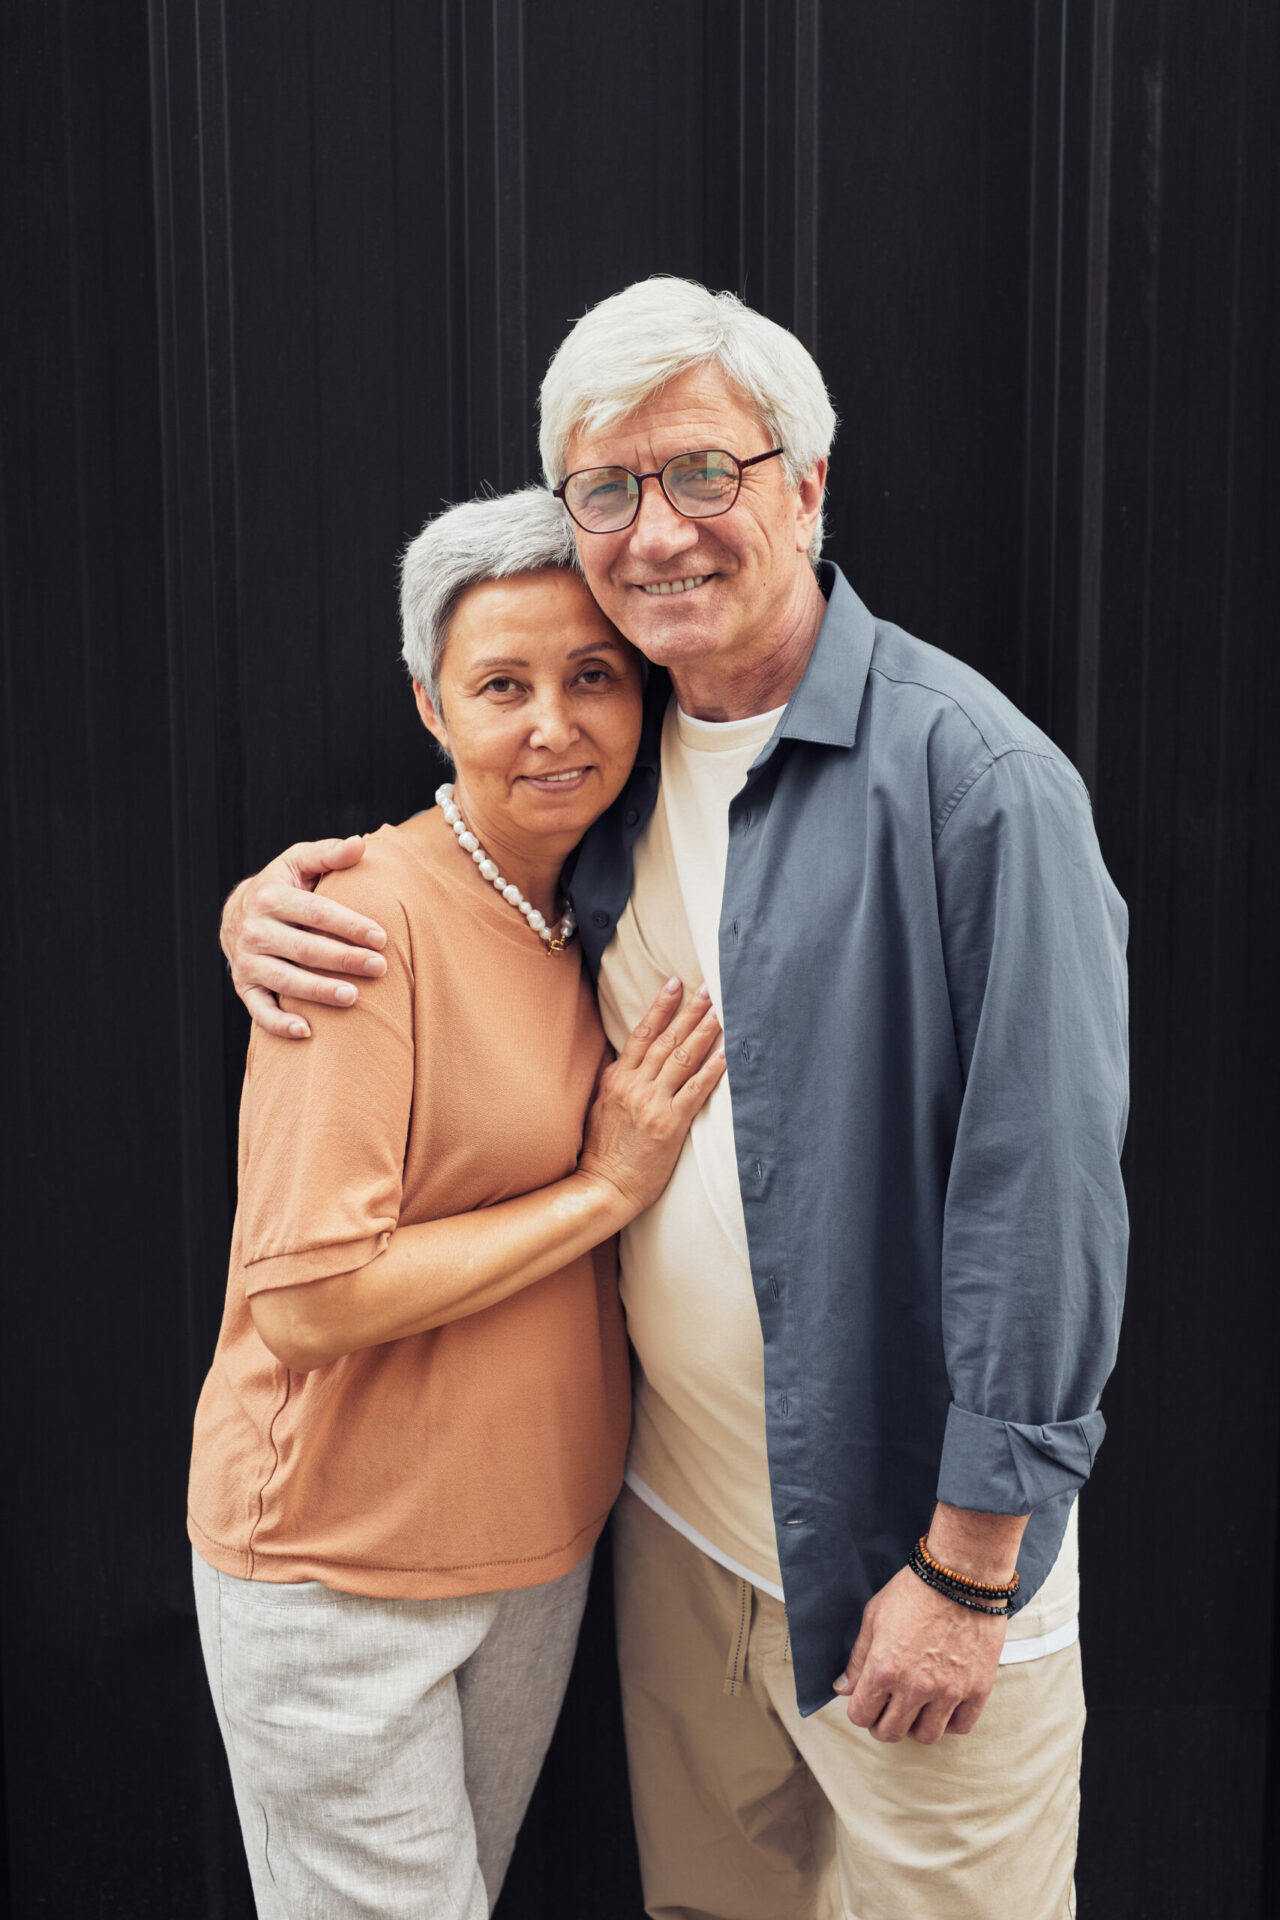 Vertical portrait of modern mature couple embracing and looking at6 camera while standing against black background